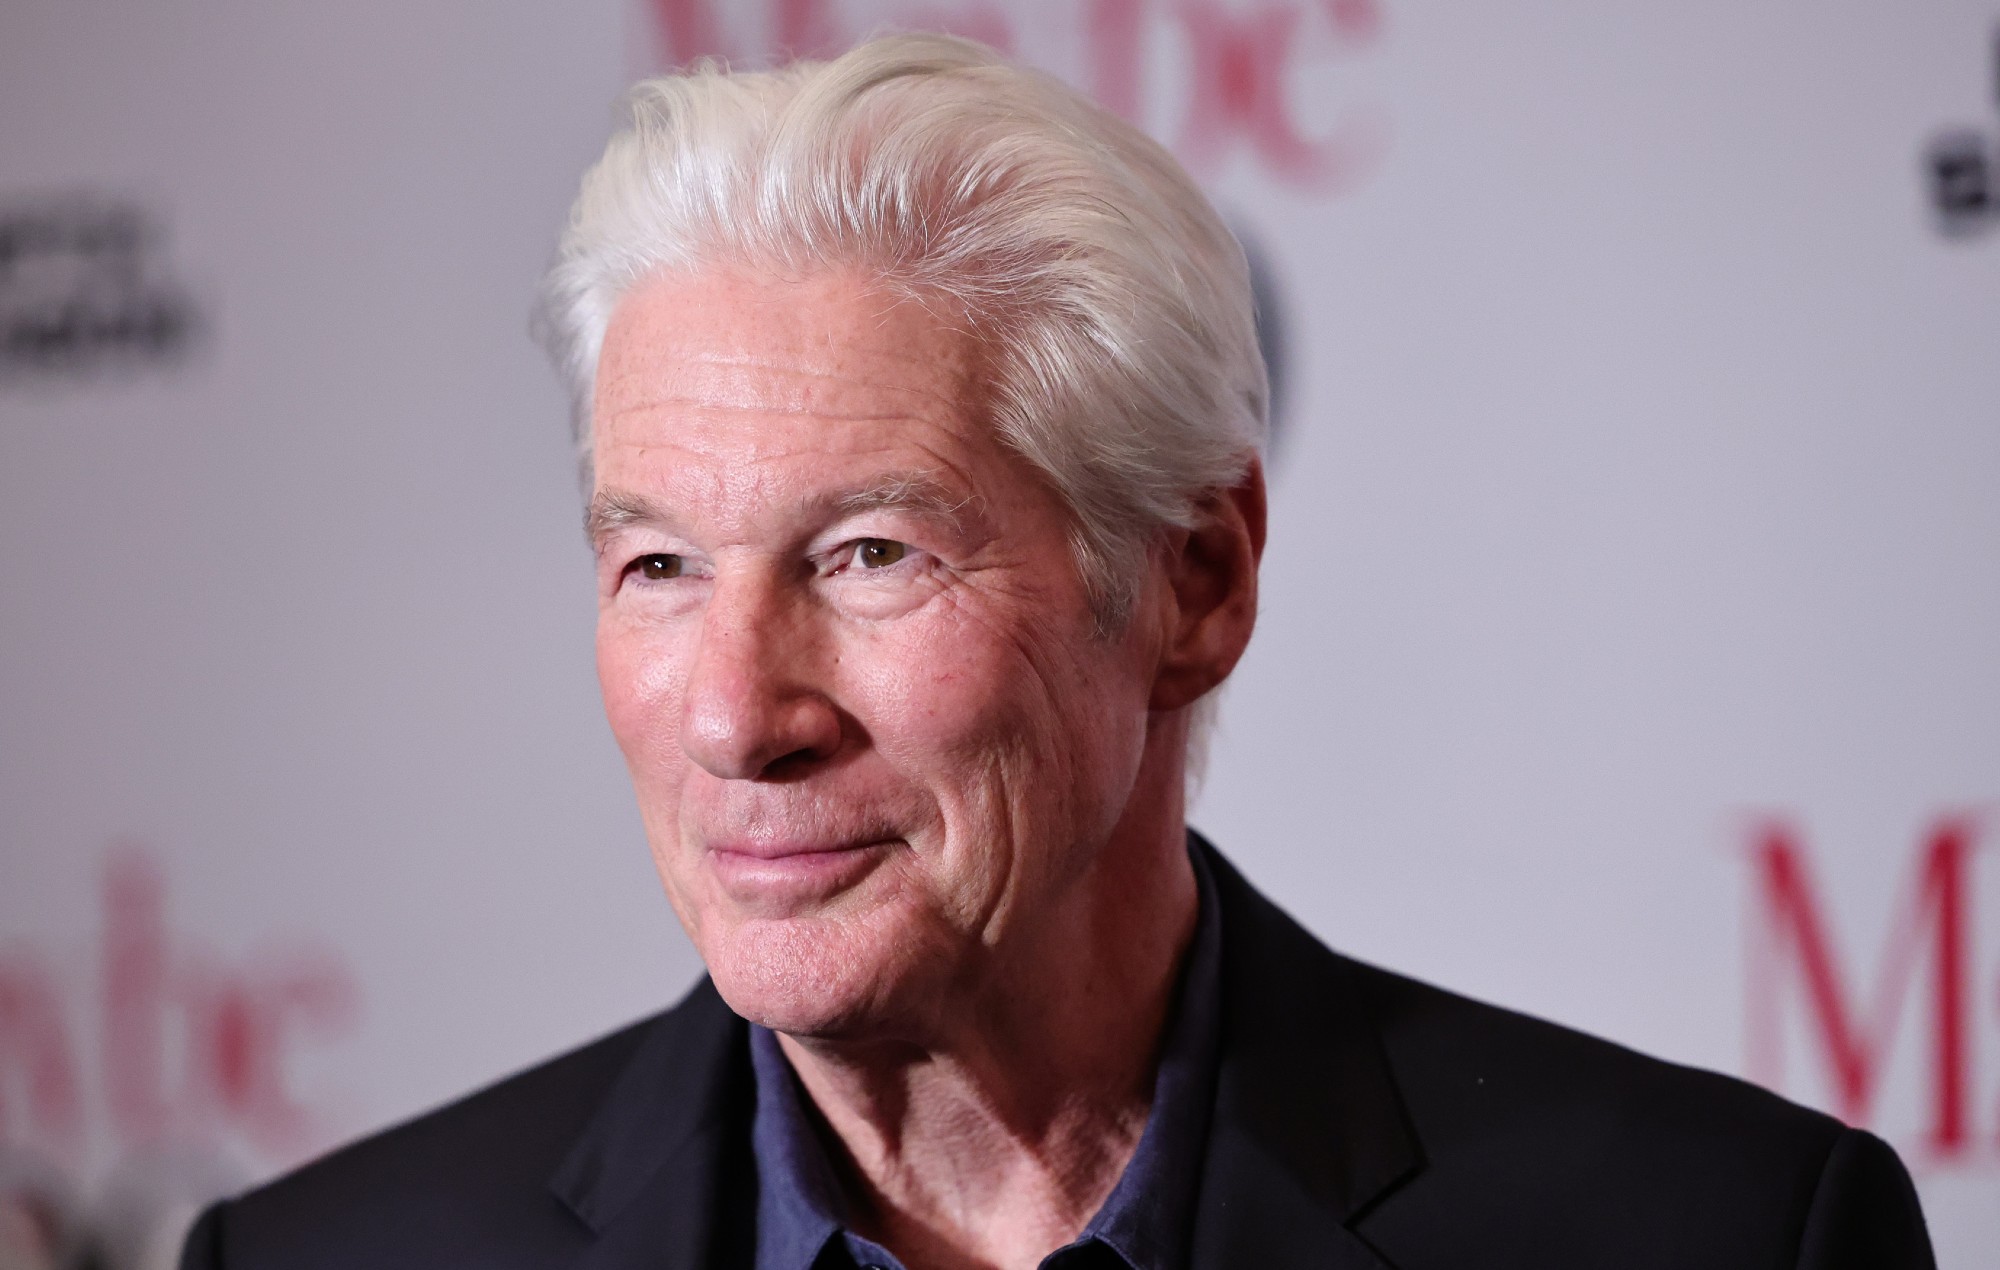 Richard Gere “almost back to normal” after being rushed to hospital for pneumonia